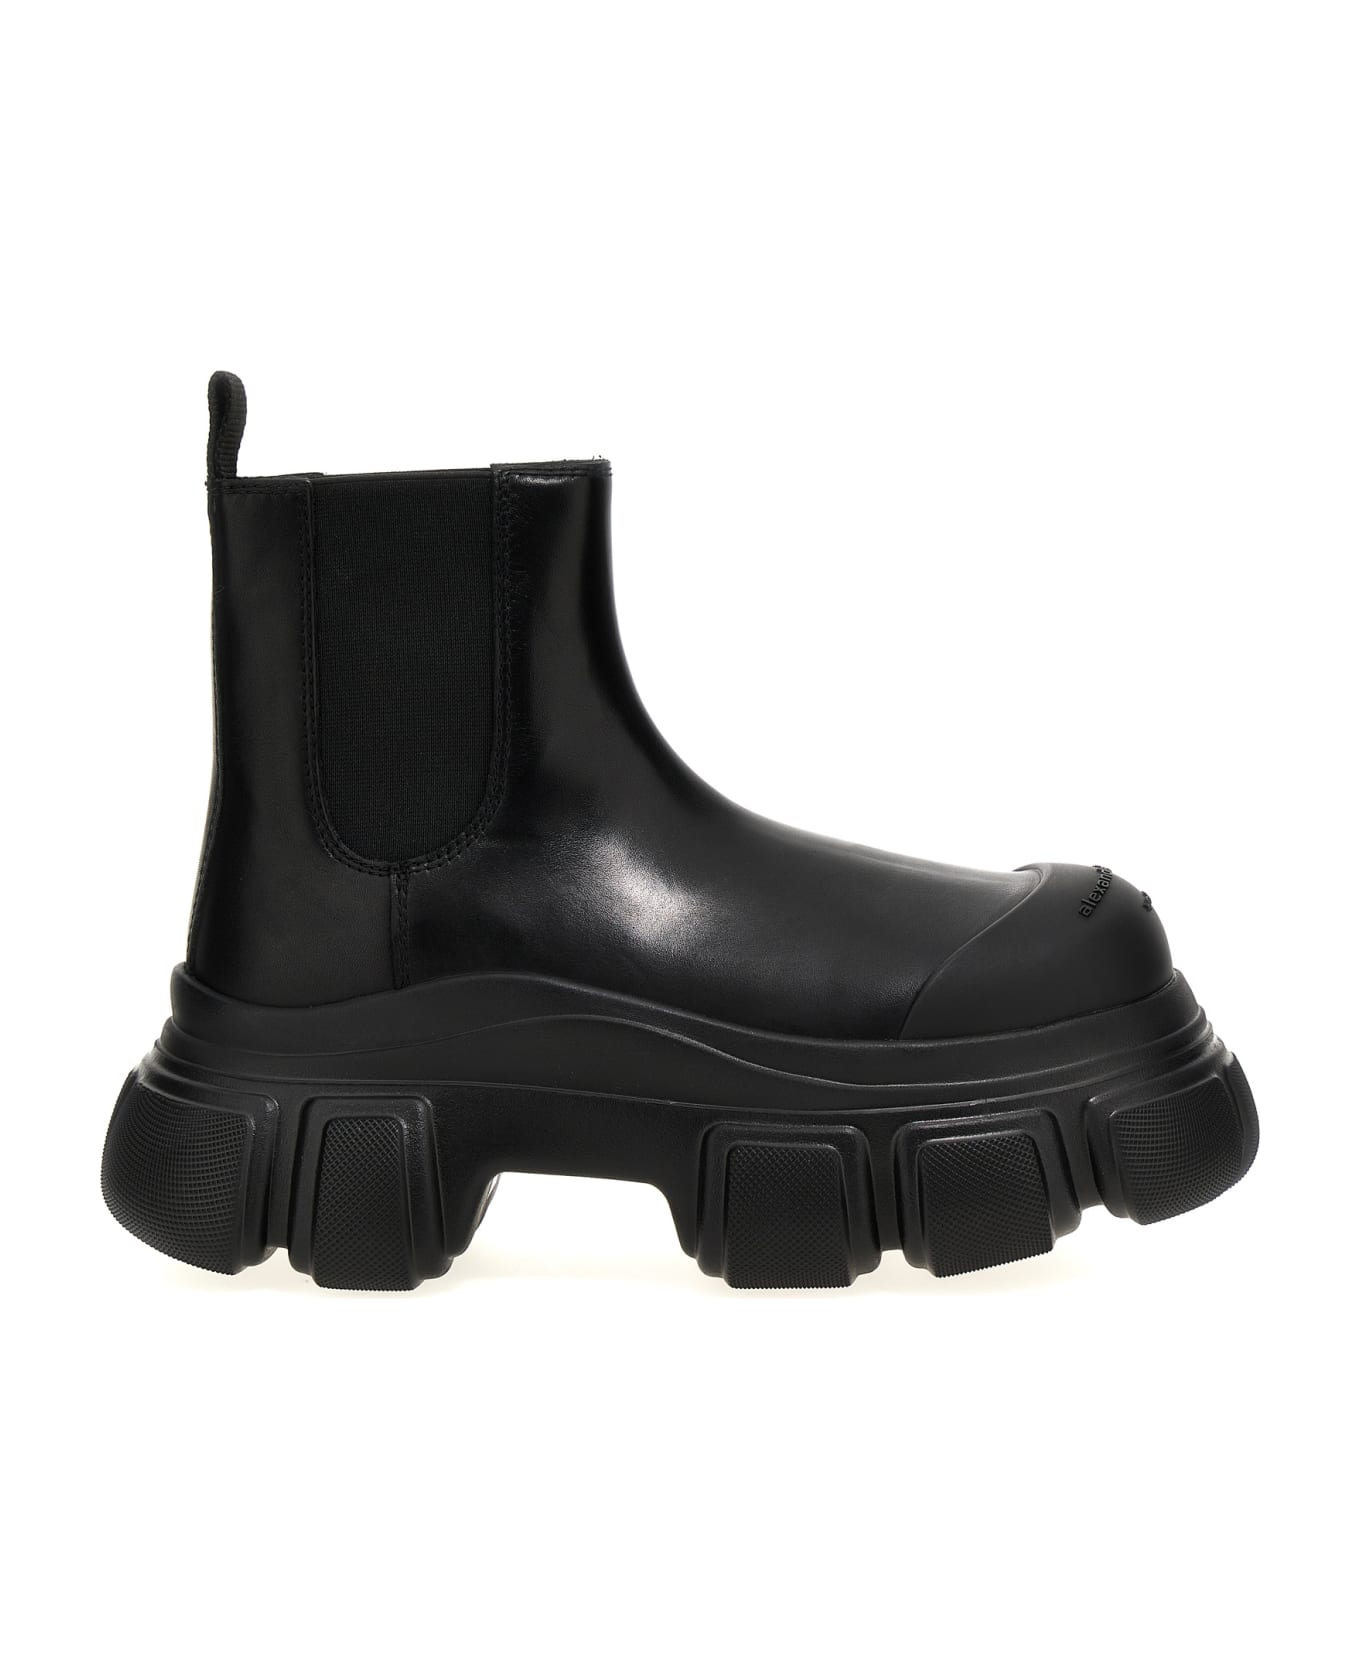 Alexander Wang 'storm' Ankle Boots - Black  